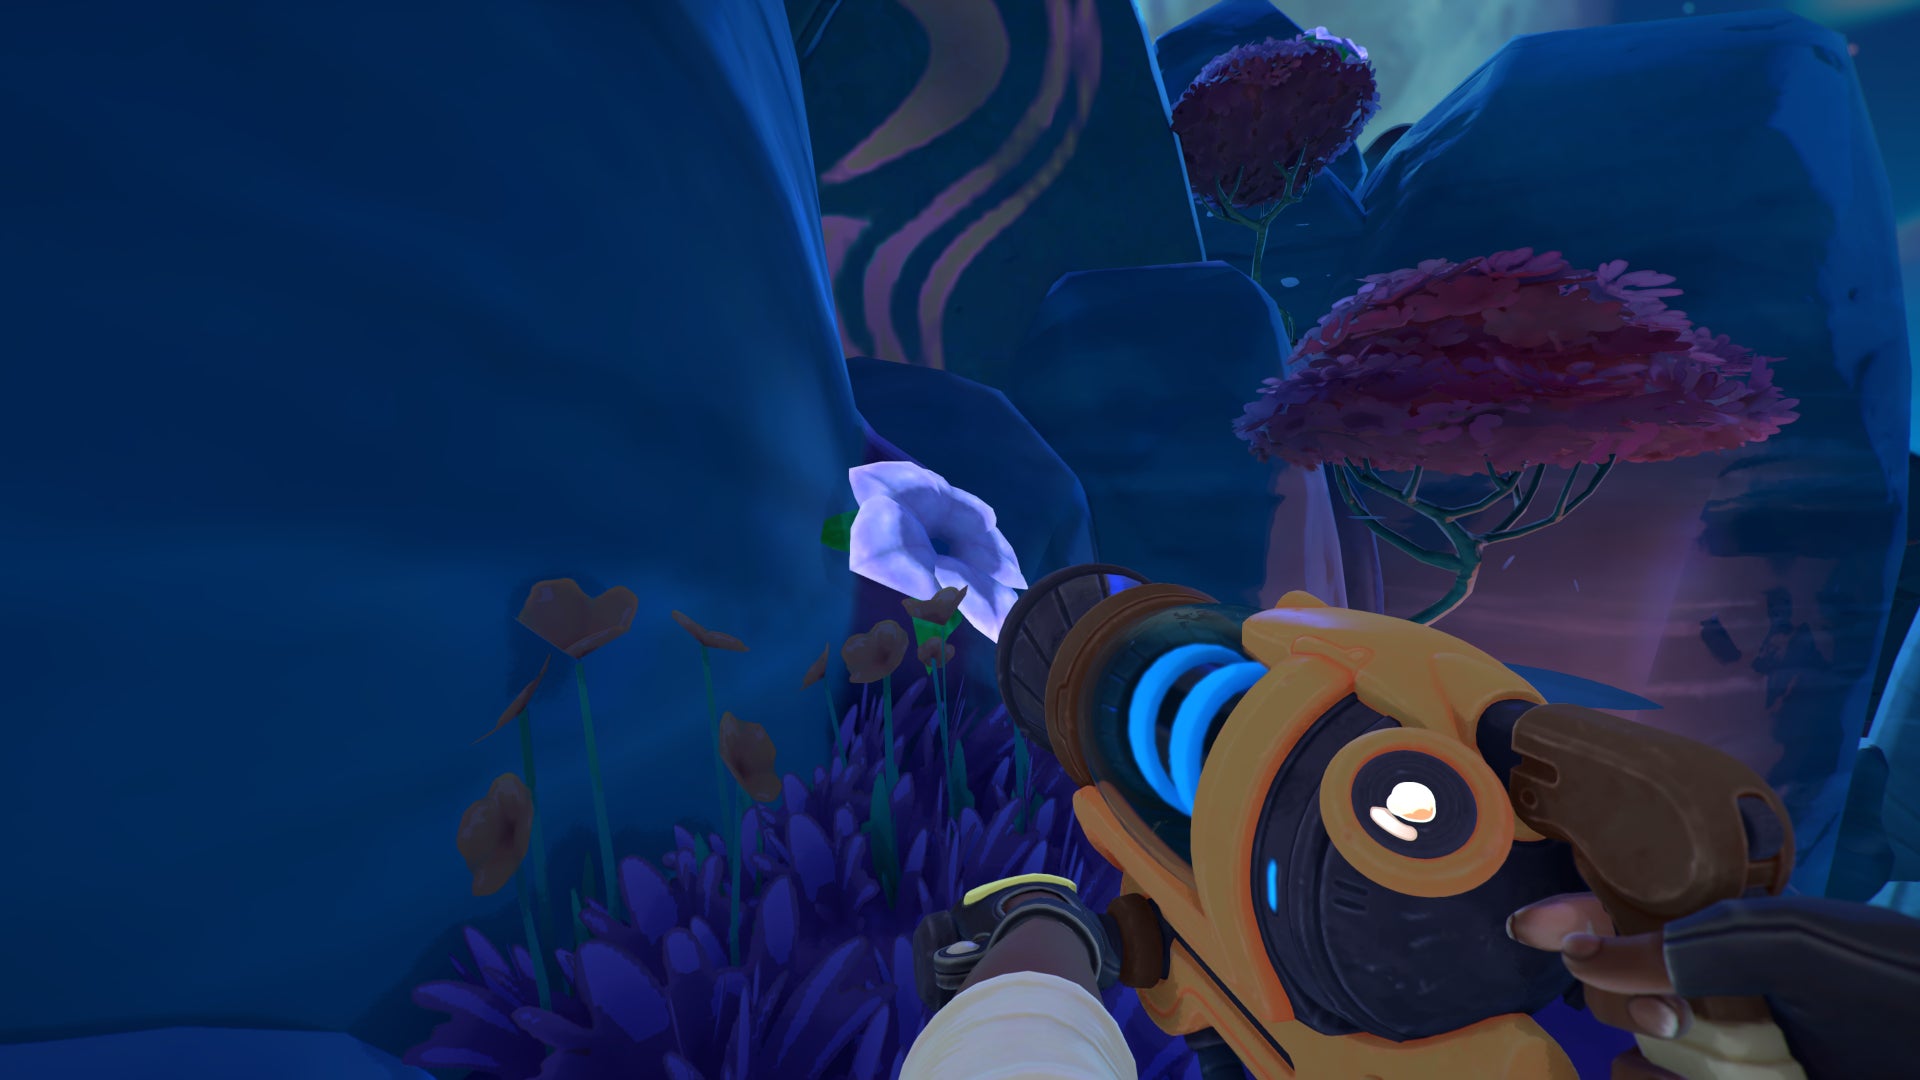 Slime Rancher 2 Nectar guide: How to get the Jetpack for more Moondew Nectar  | VG247